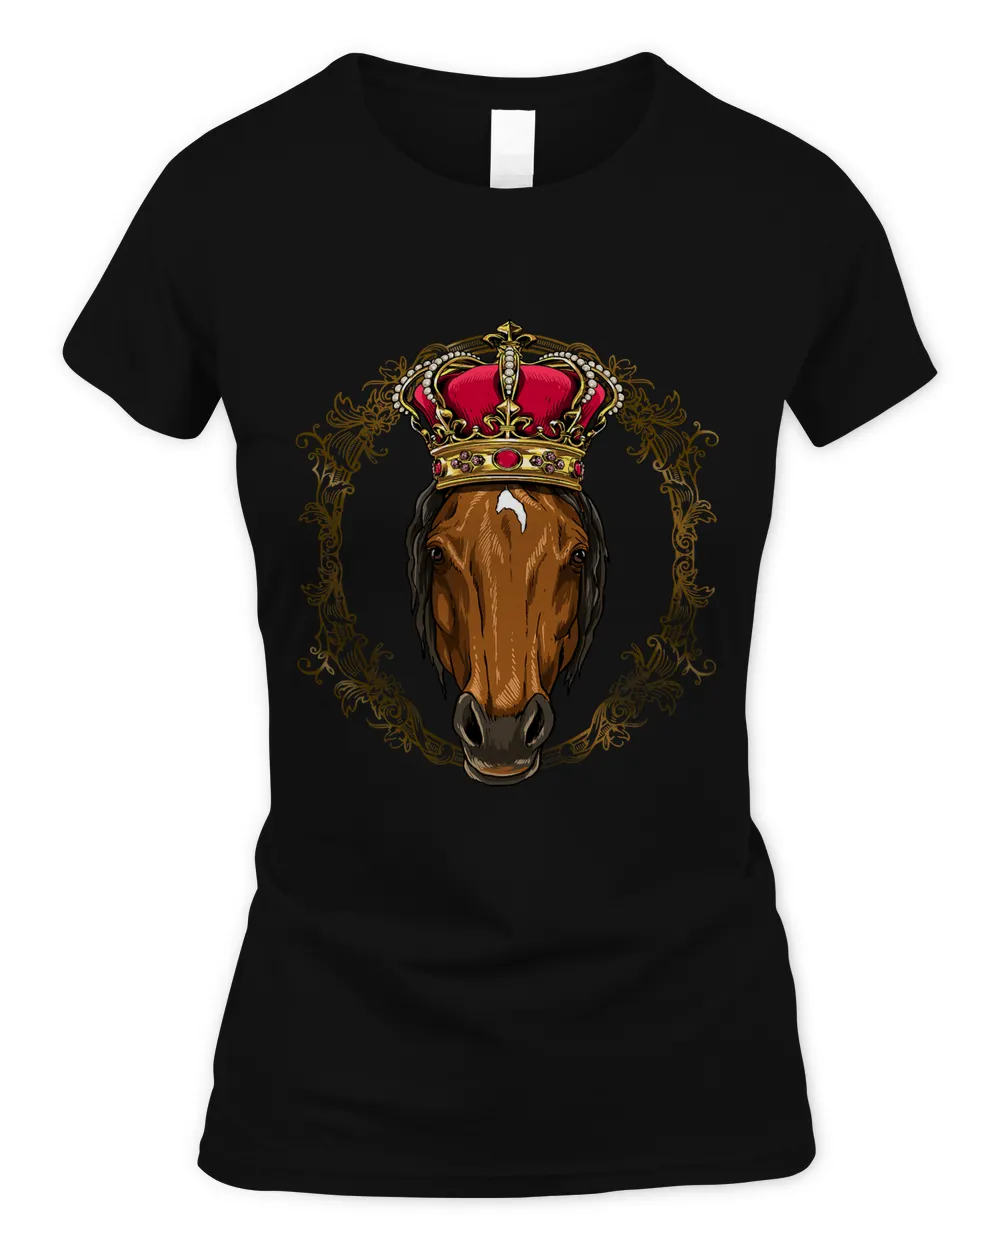 King Horse Wearing CrownQueen Horse Animal 328